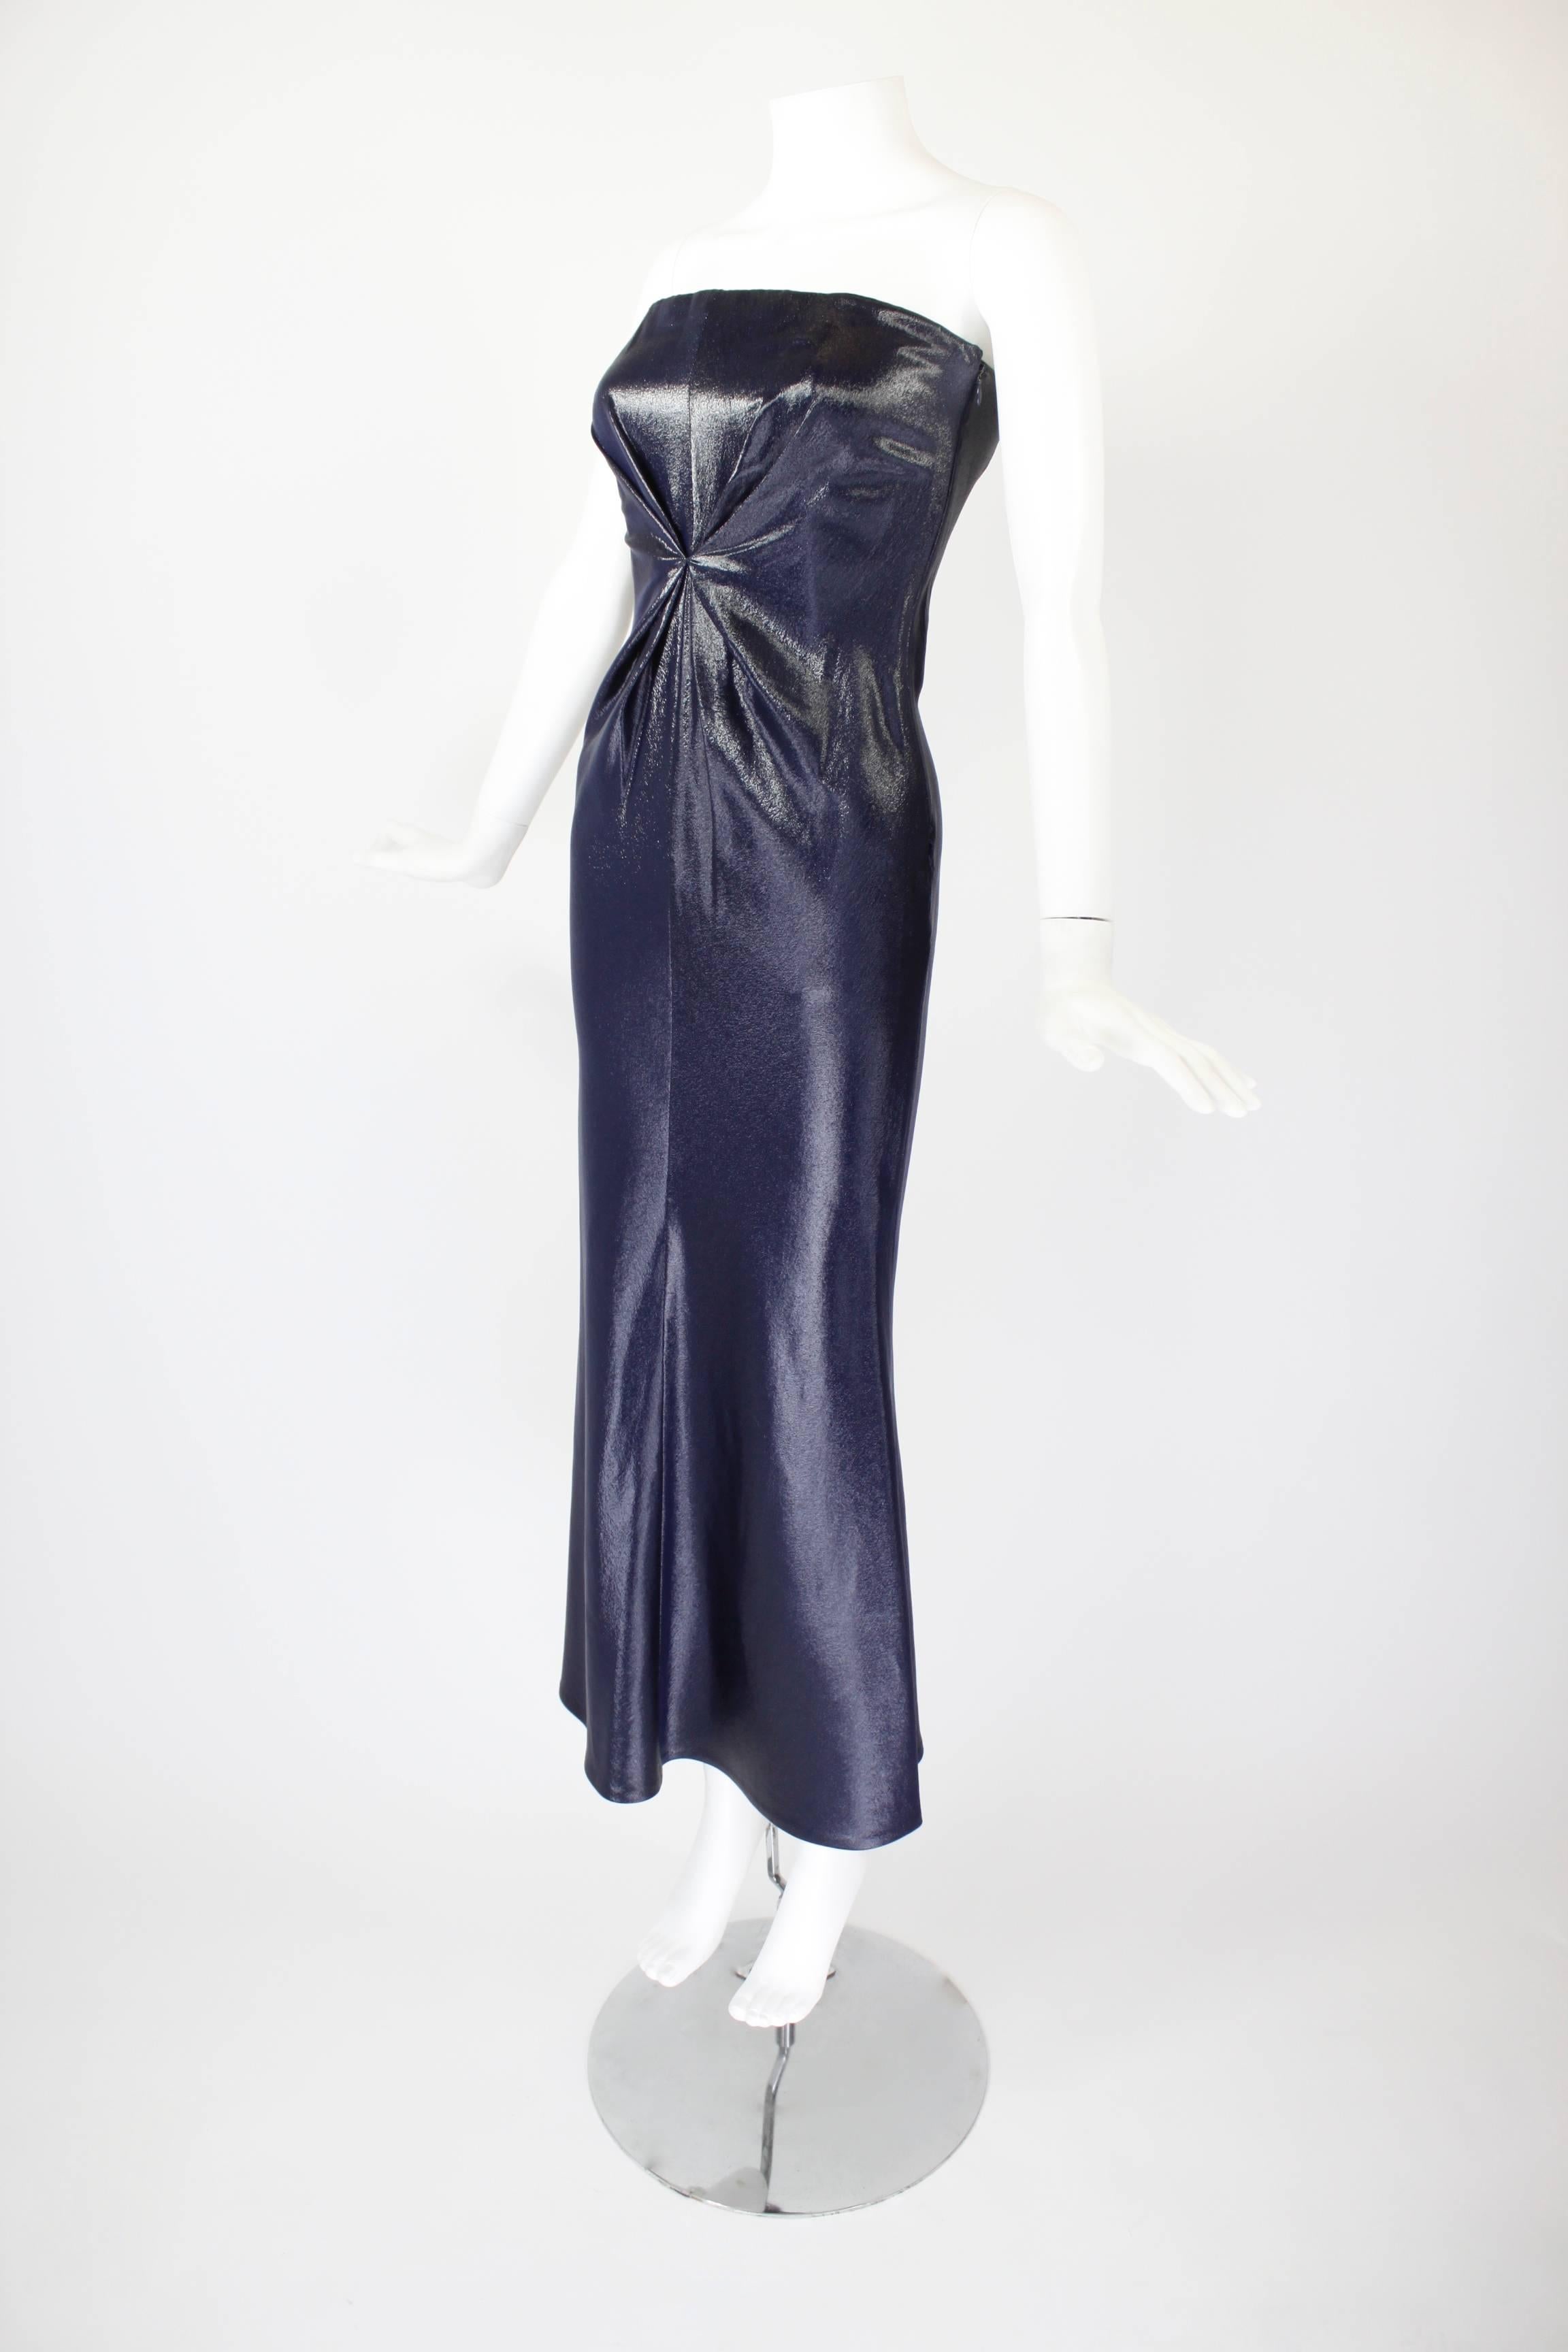 Lifetime Versace Navy Strapless Wet Look Gown with Gathered Detail

-Invisible side zip closure
-Built-in corset

Measurements--
Bust: 32 inches
Waist: 24 inches
Hip: 36 inches
Length, Top to Hem: 51 inches